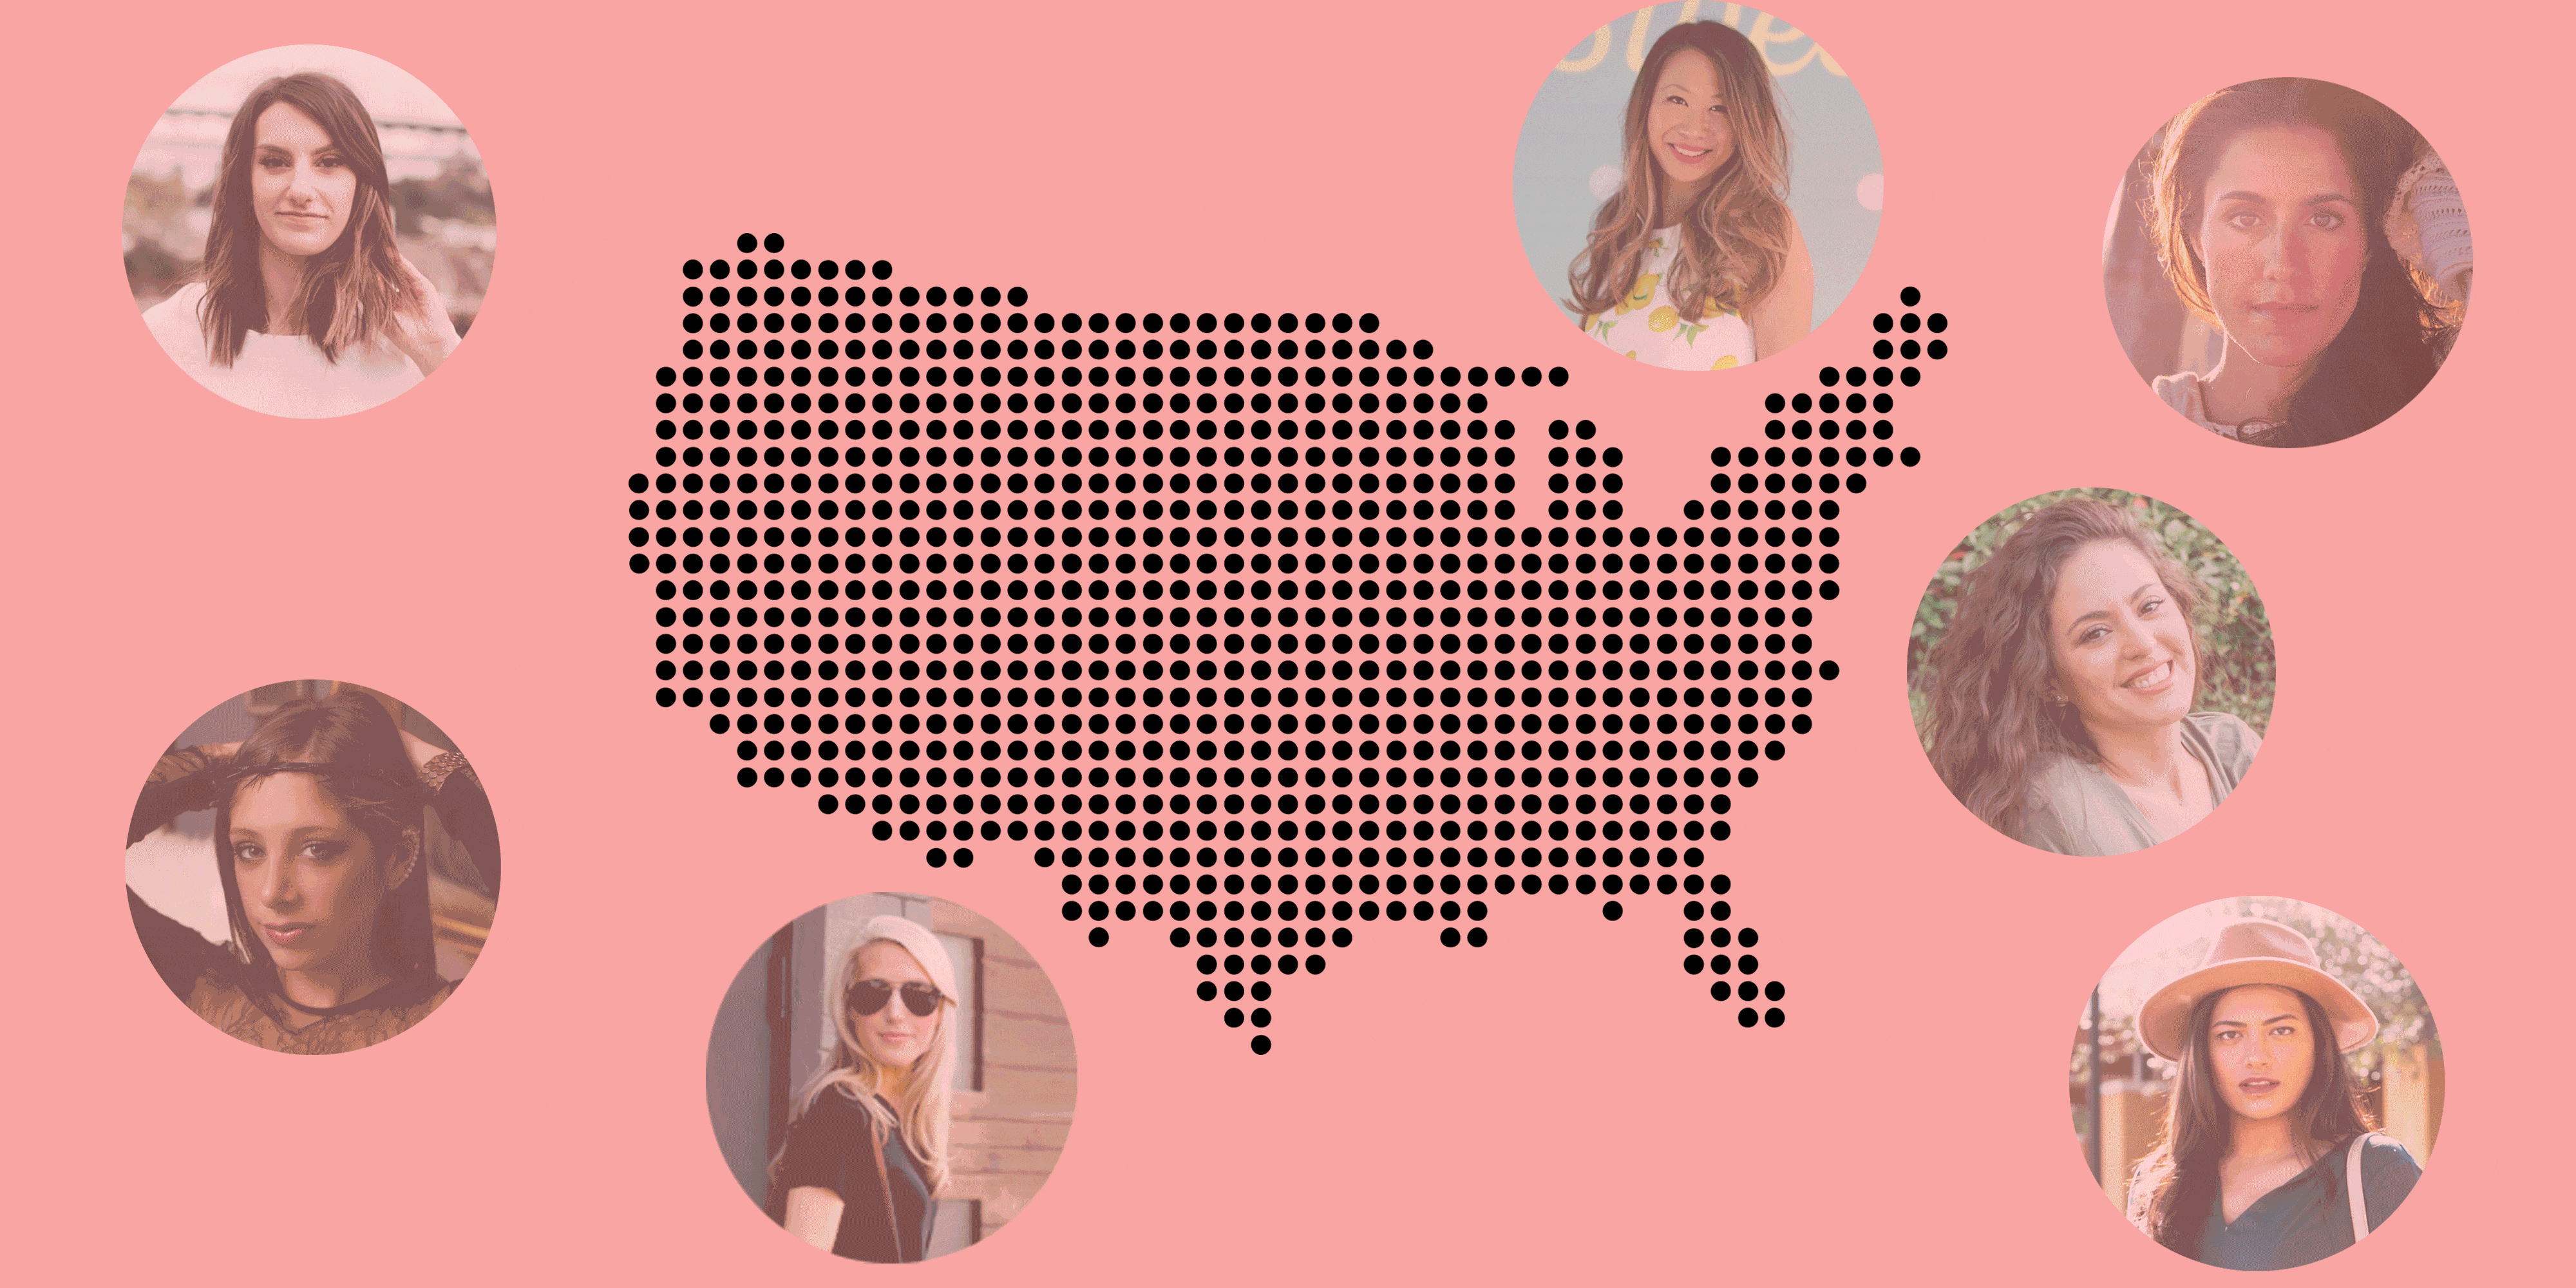 A map of the USA with arrows pointing out where each blogger is from.